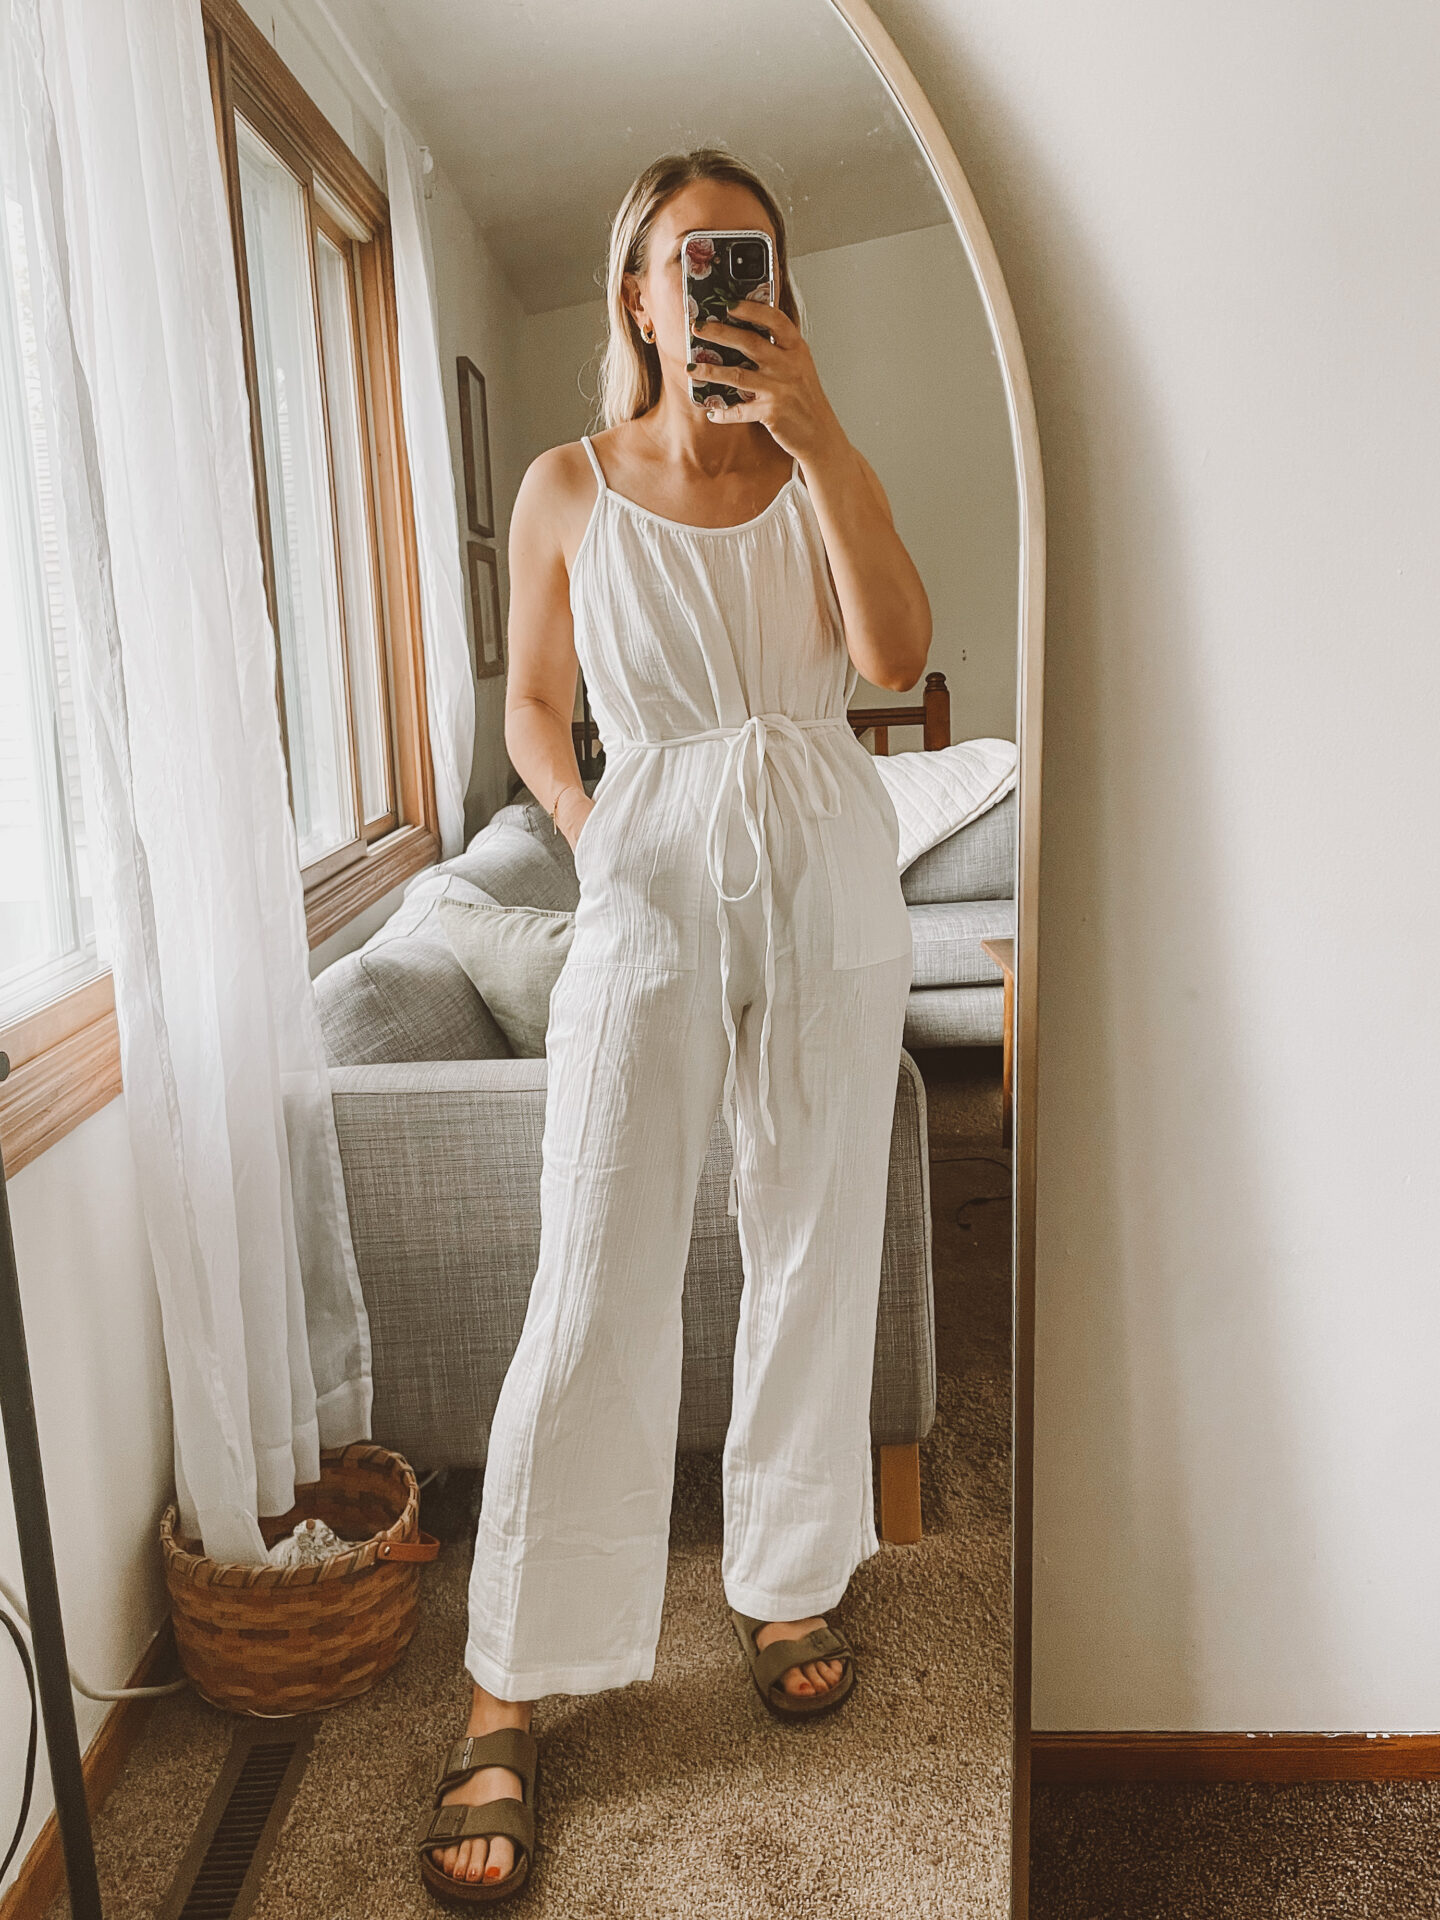 Karin Emily wears a white gauze jumpsuit from the Gap